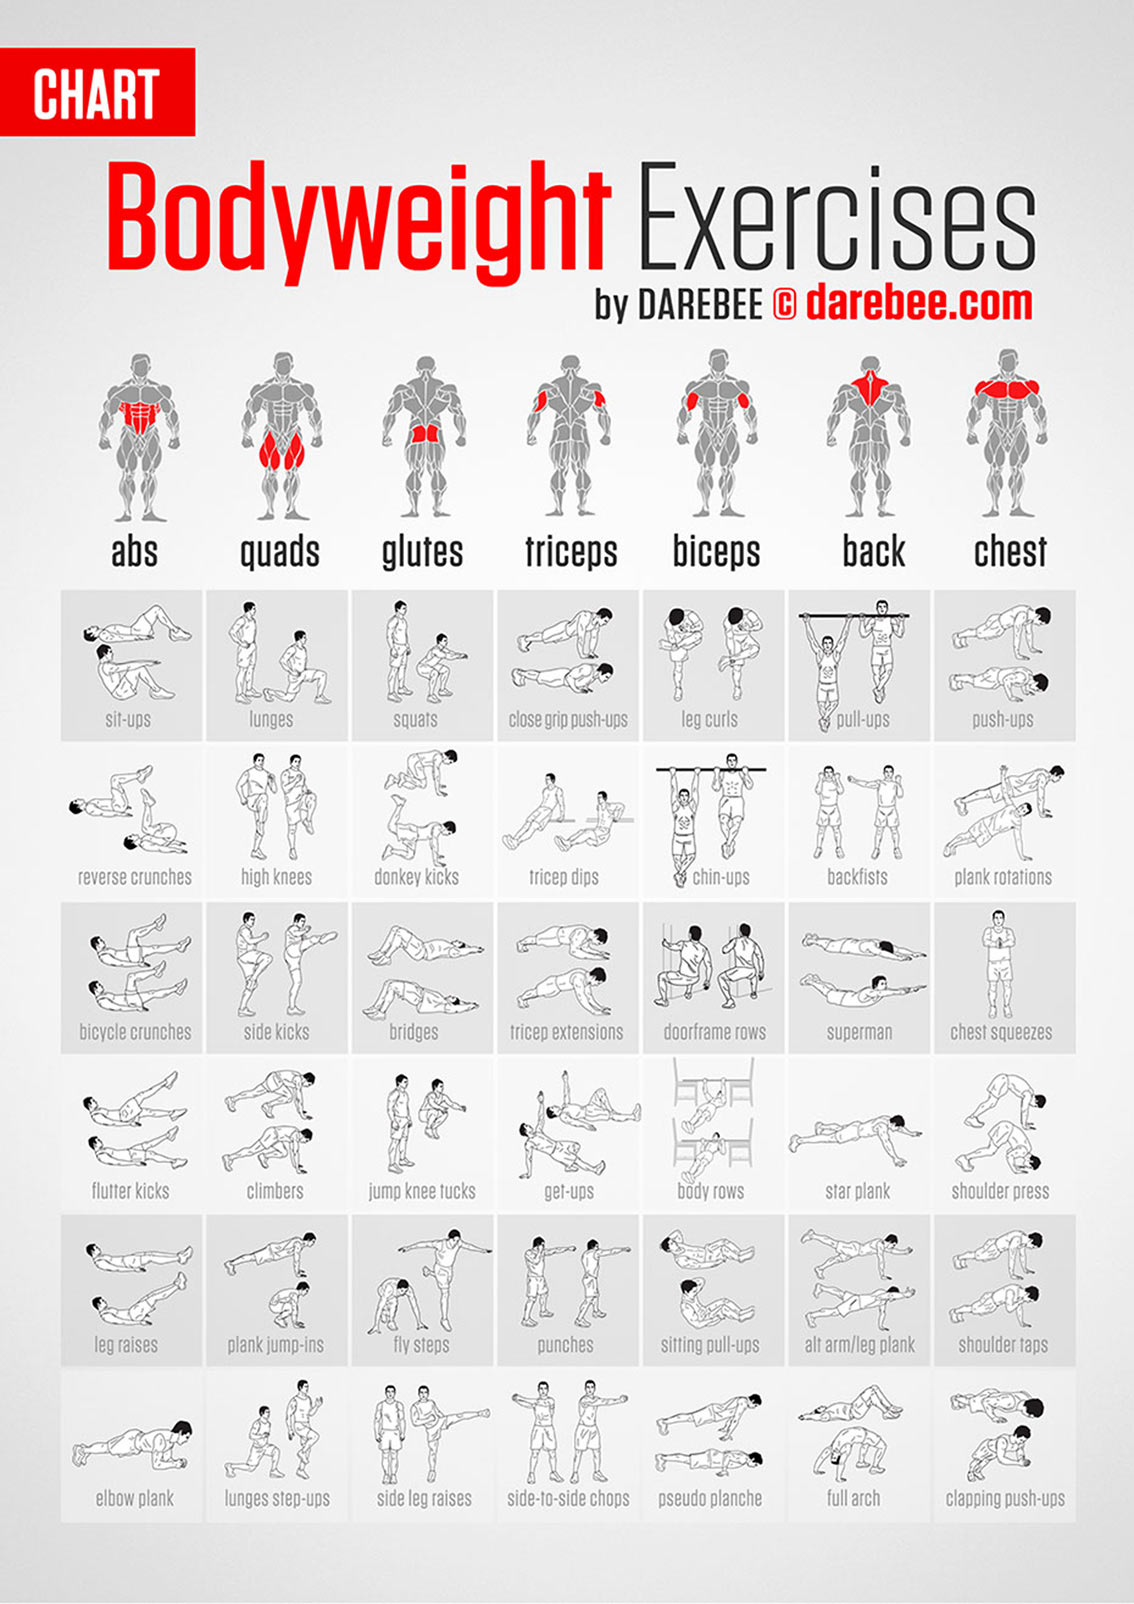 List of Bodyweight Exercises Infographic